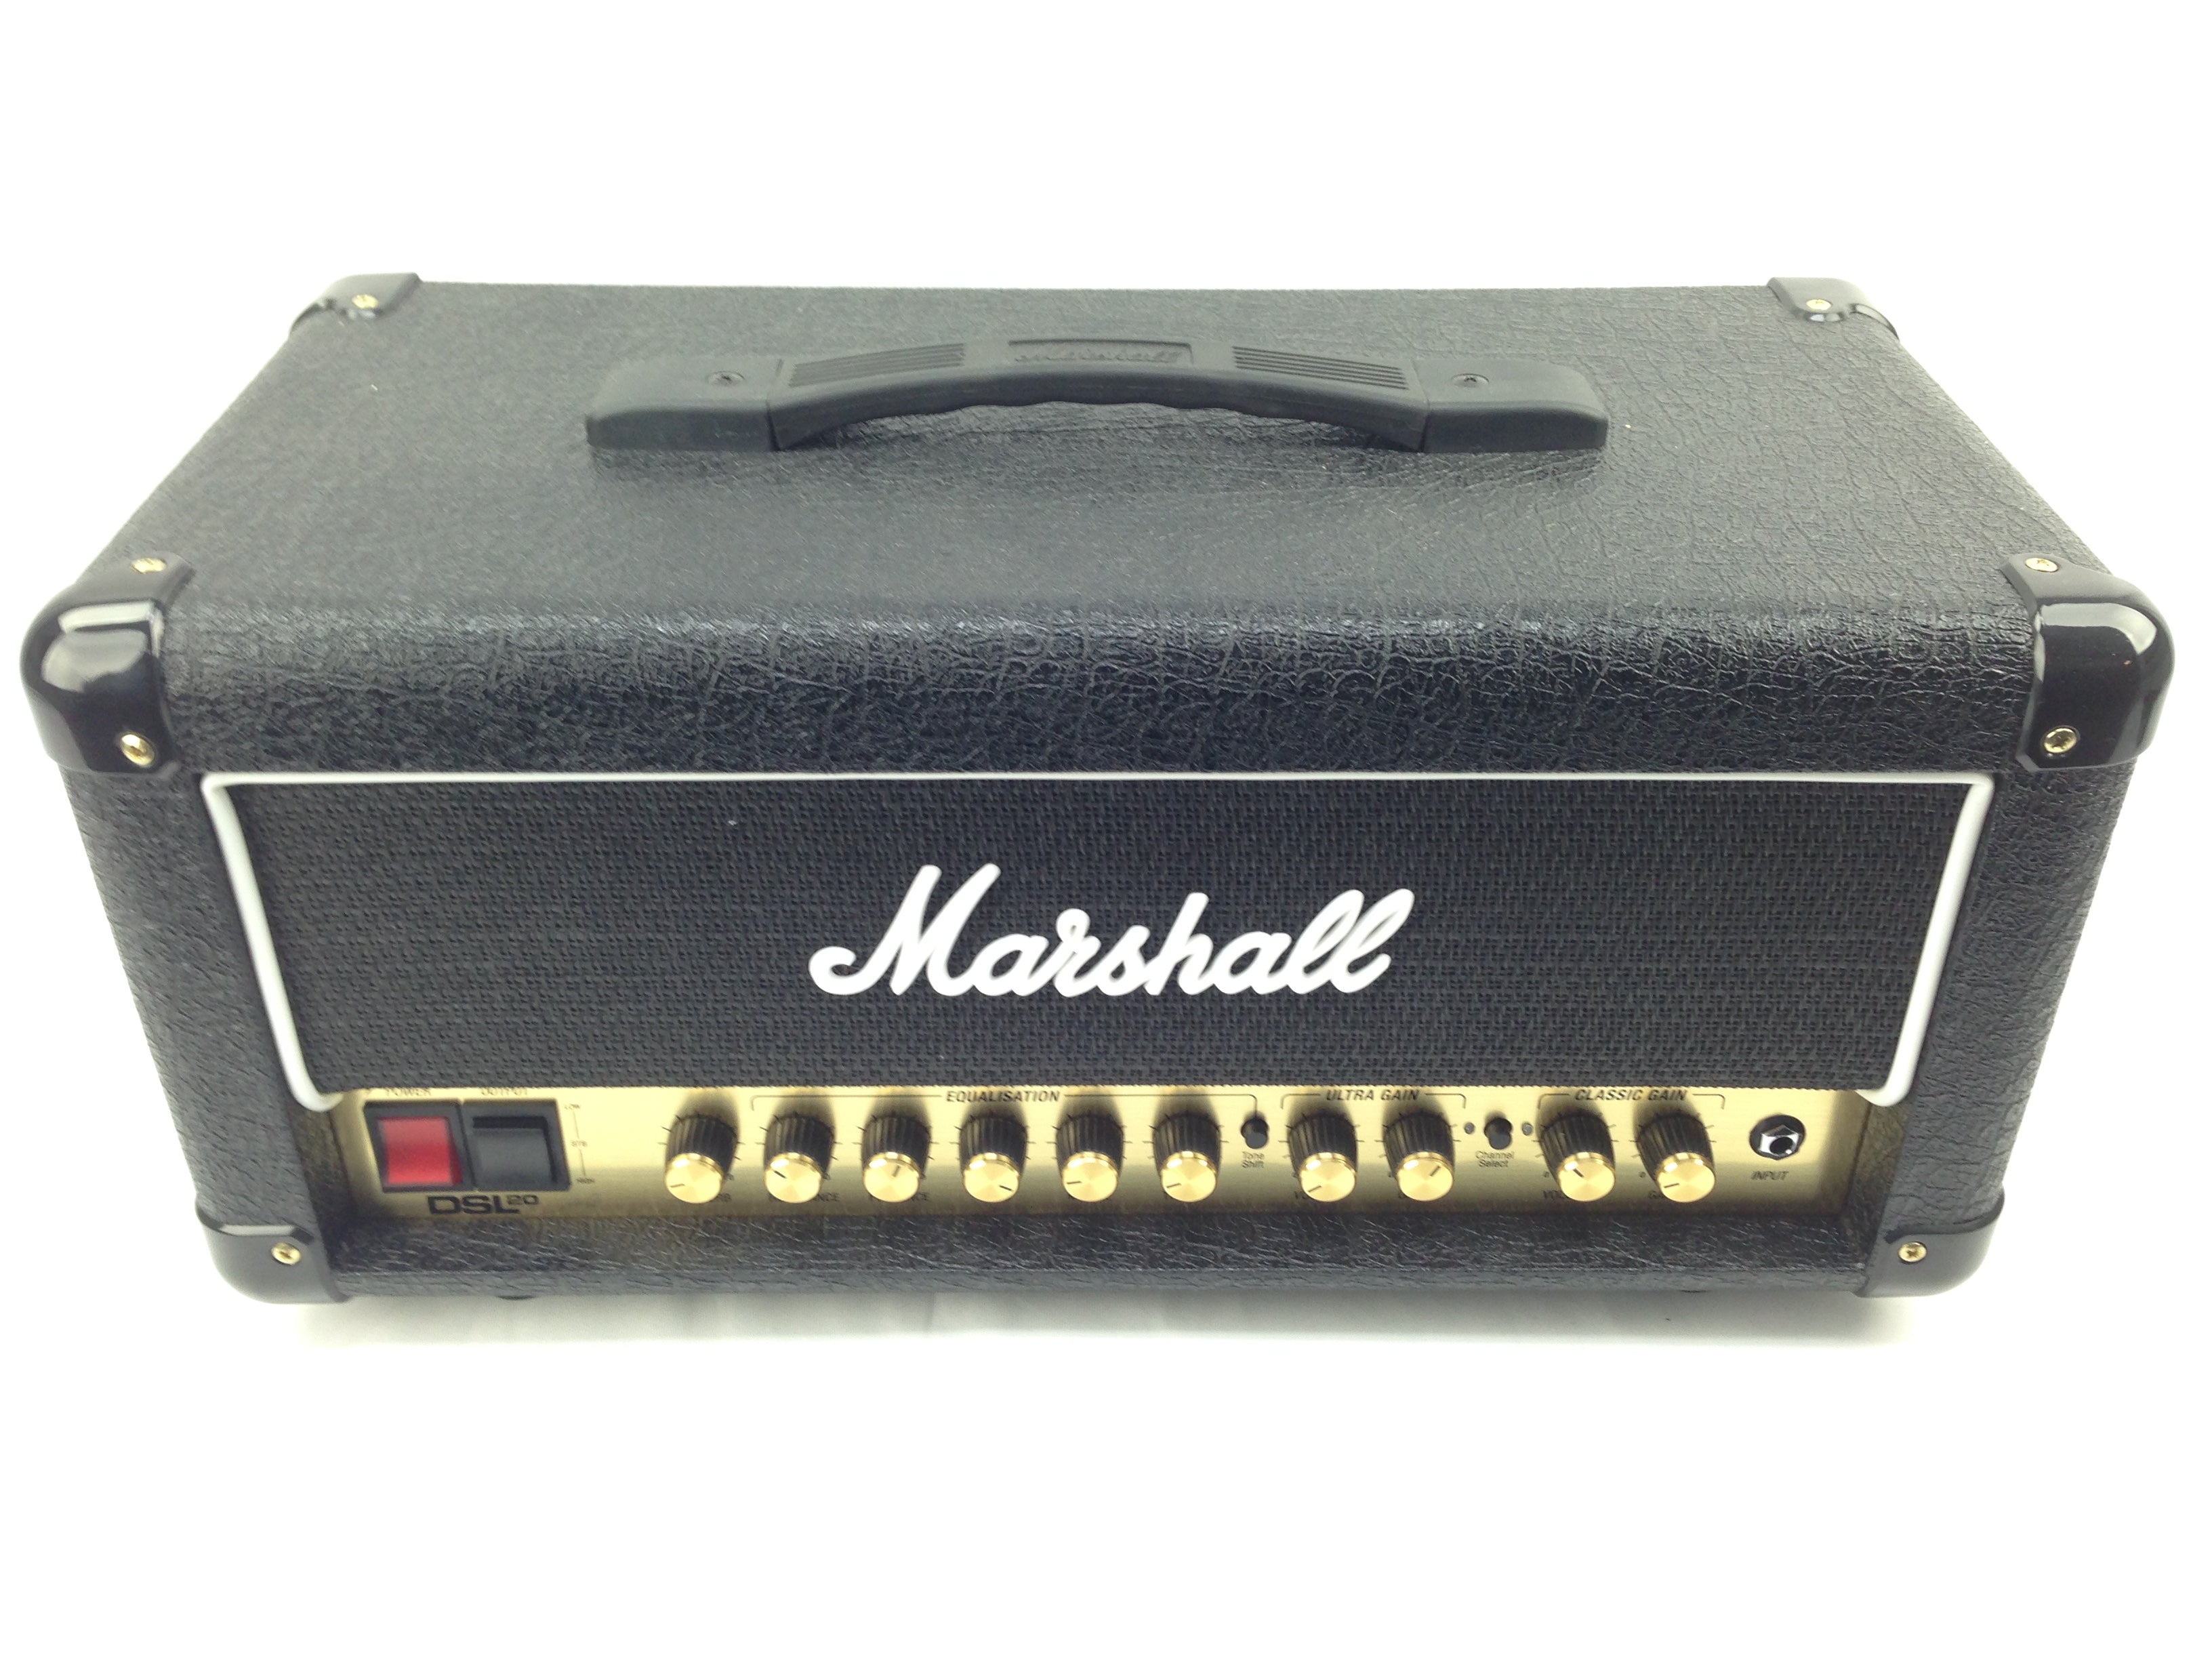 Marshall DSL20HR 20-Watt Guitar Amp Head w/ PEDL-90012 Footswitch Included